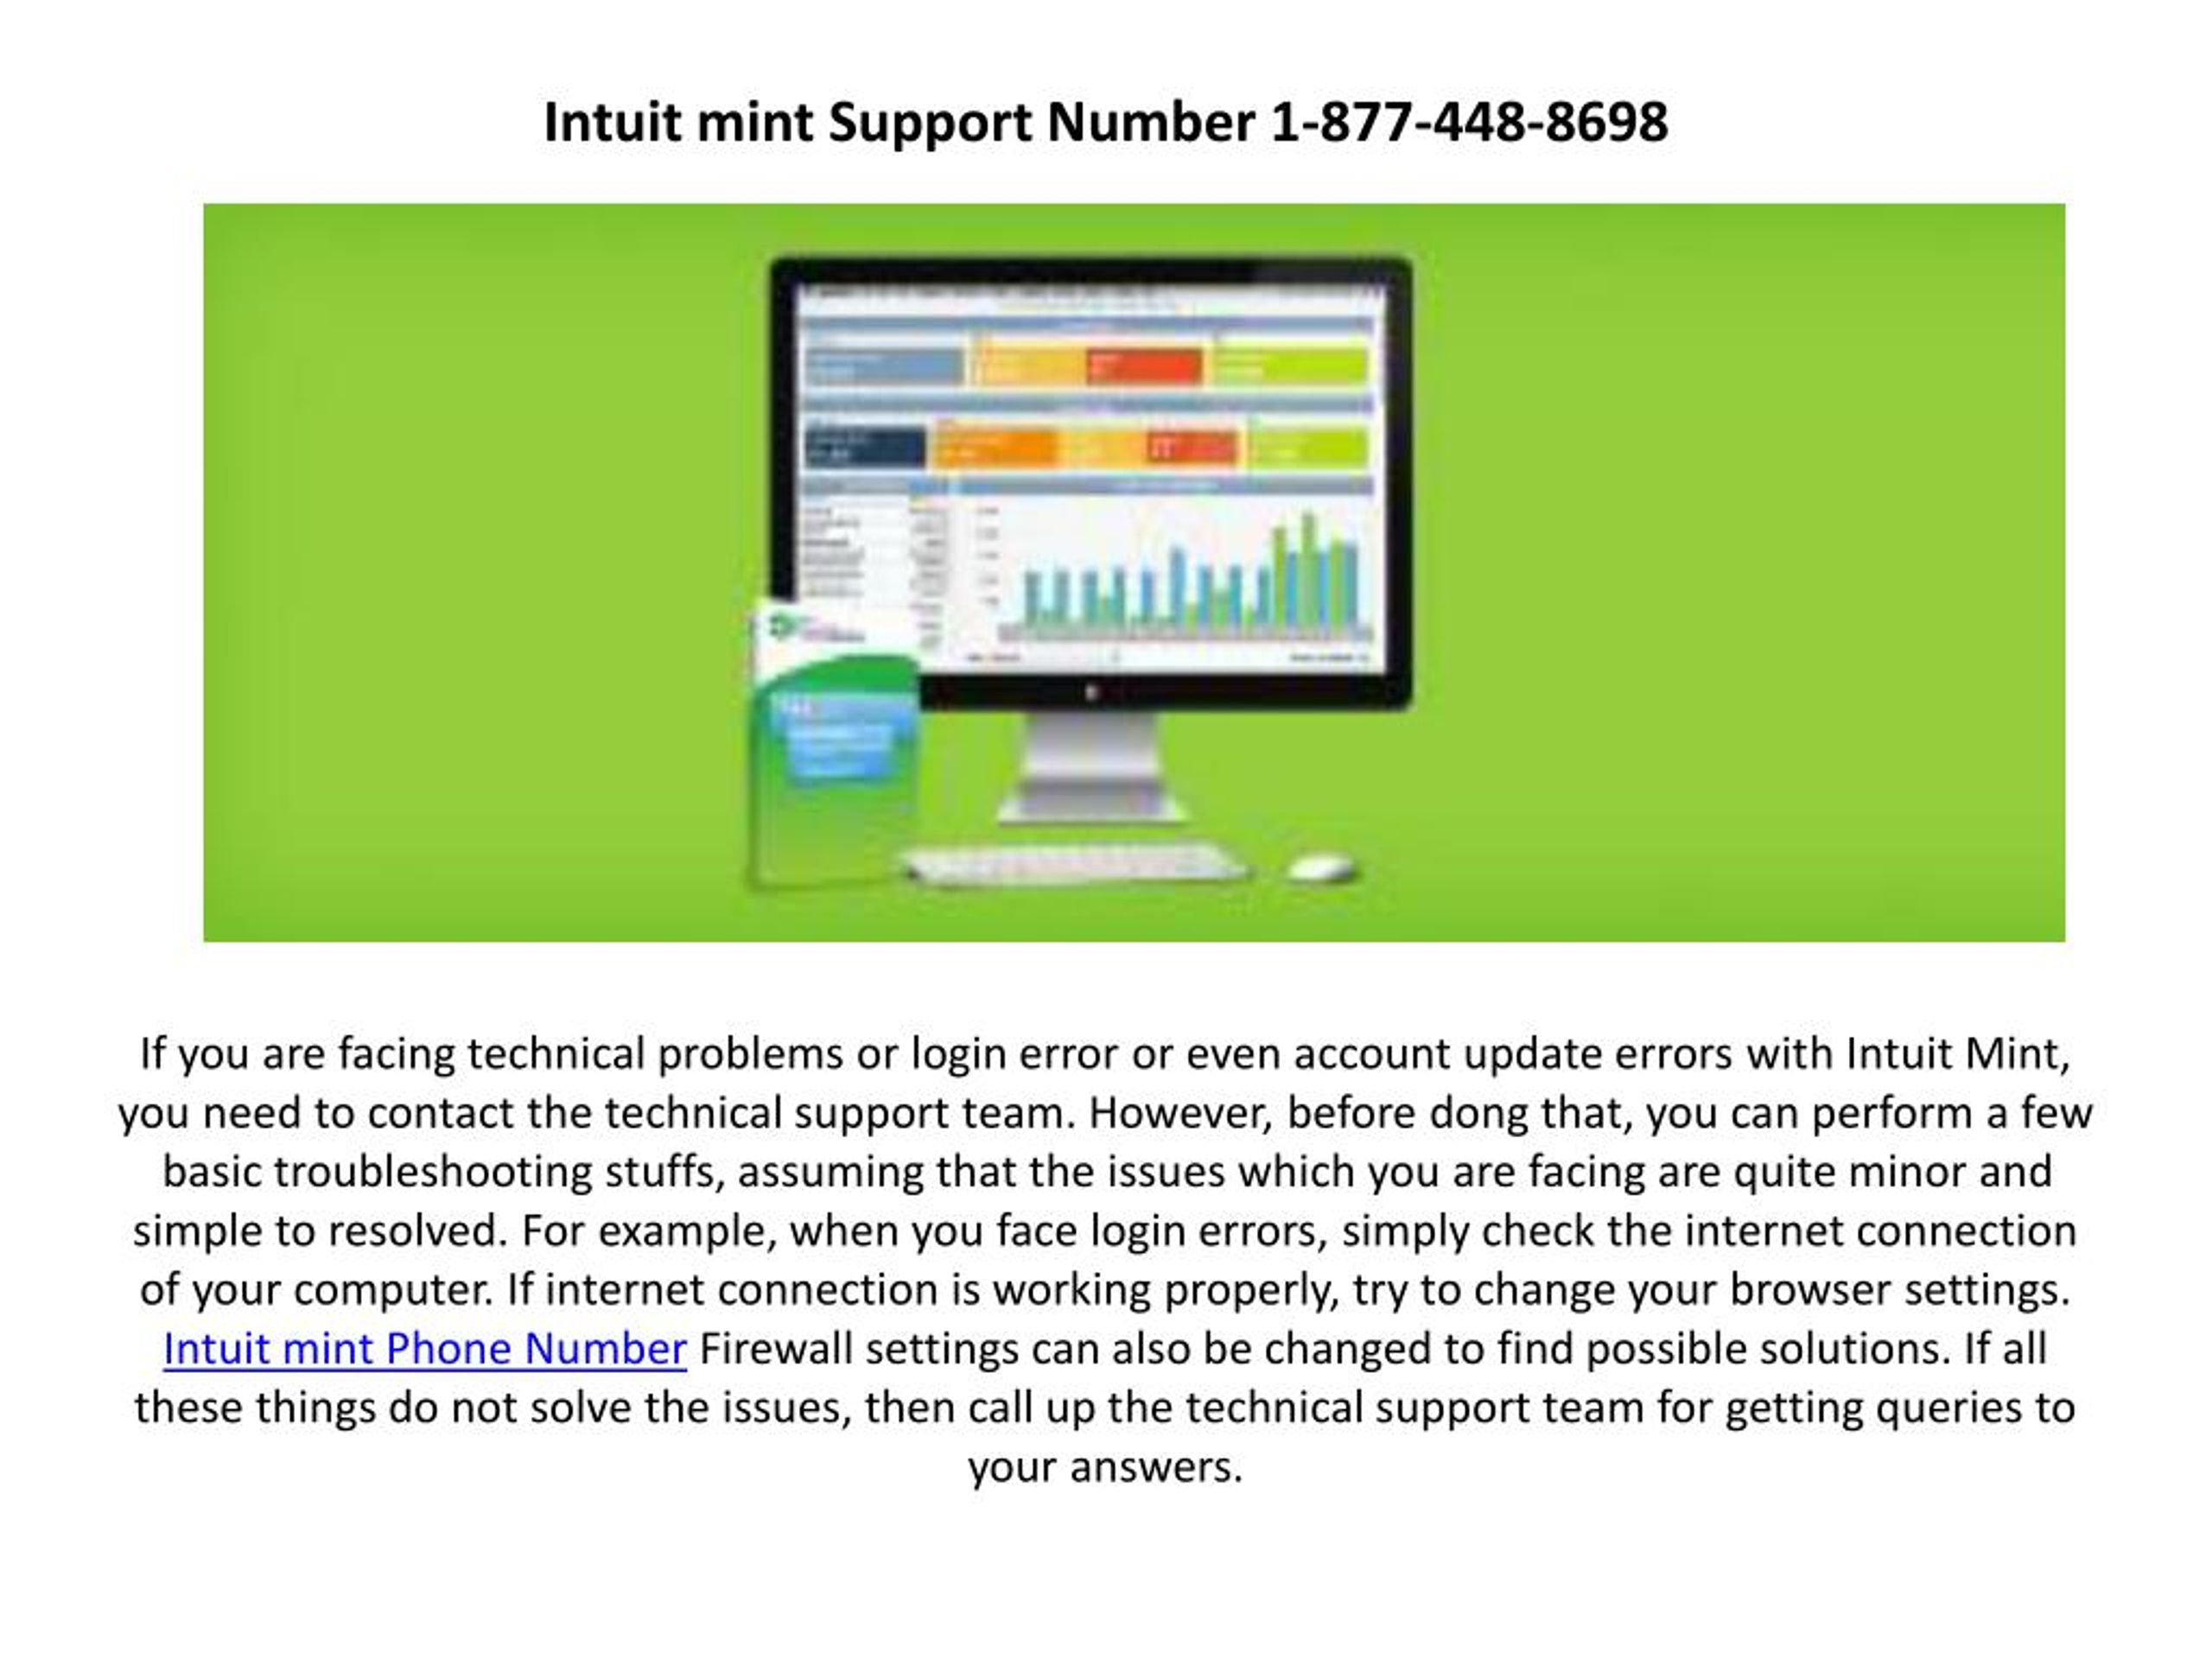 intuit mint phone number